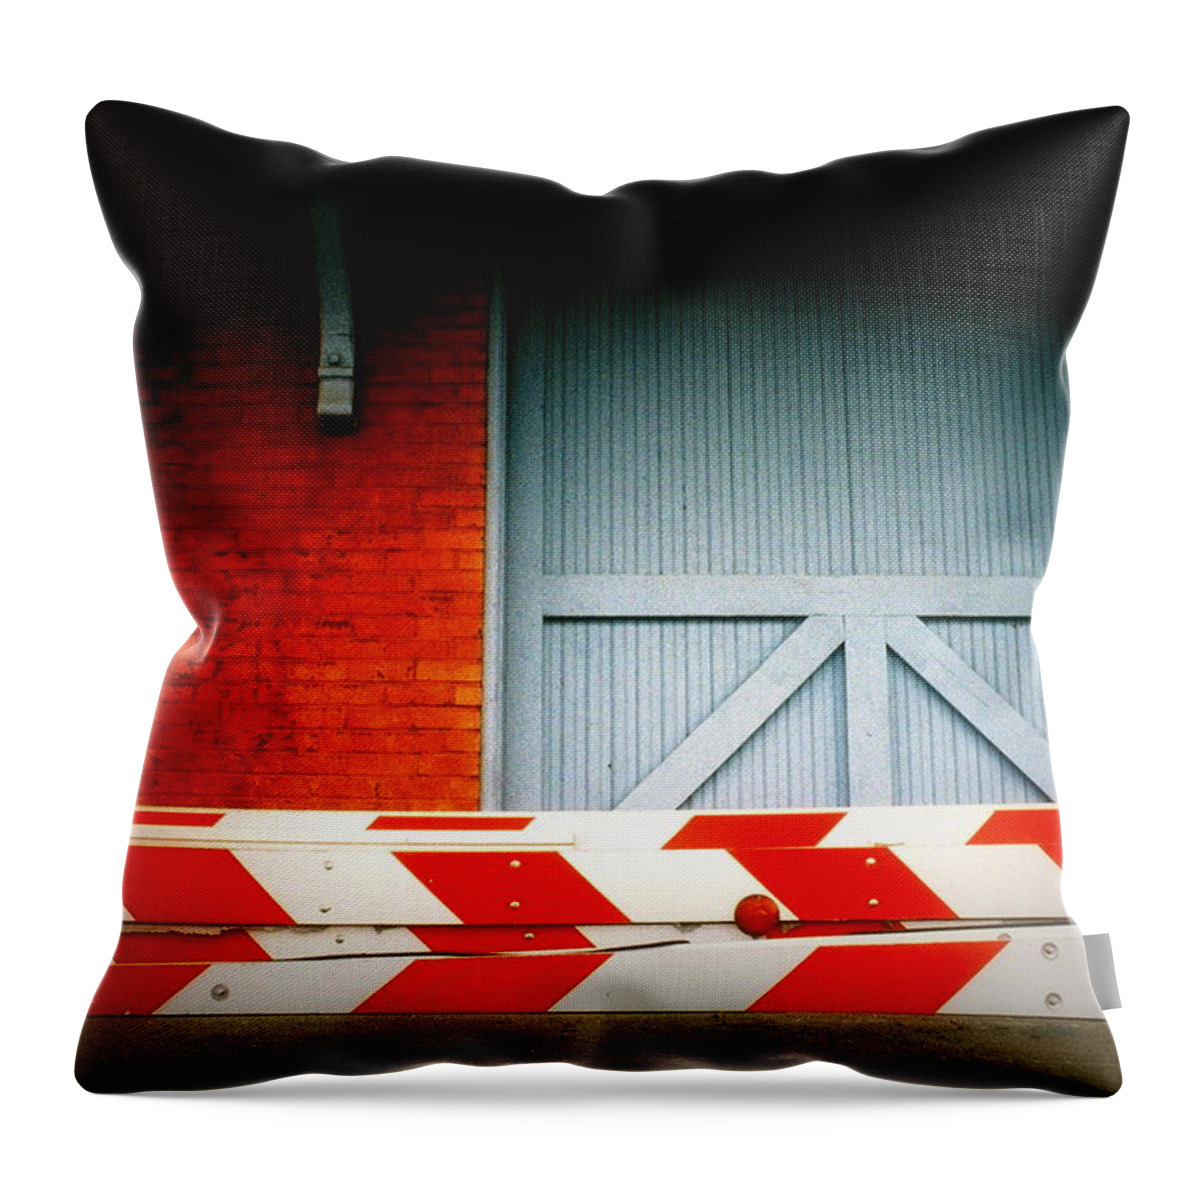 Fine Art Throw Pillow featuring the photograph No Passage by Rodney Lee Williams